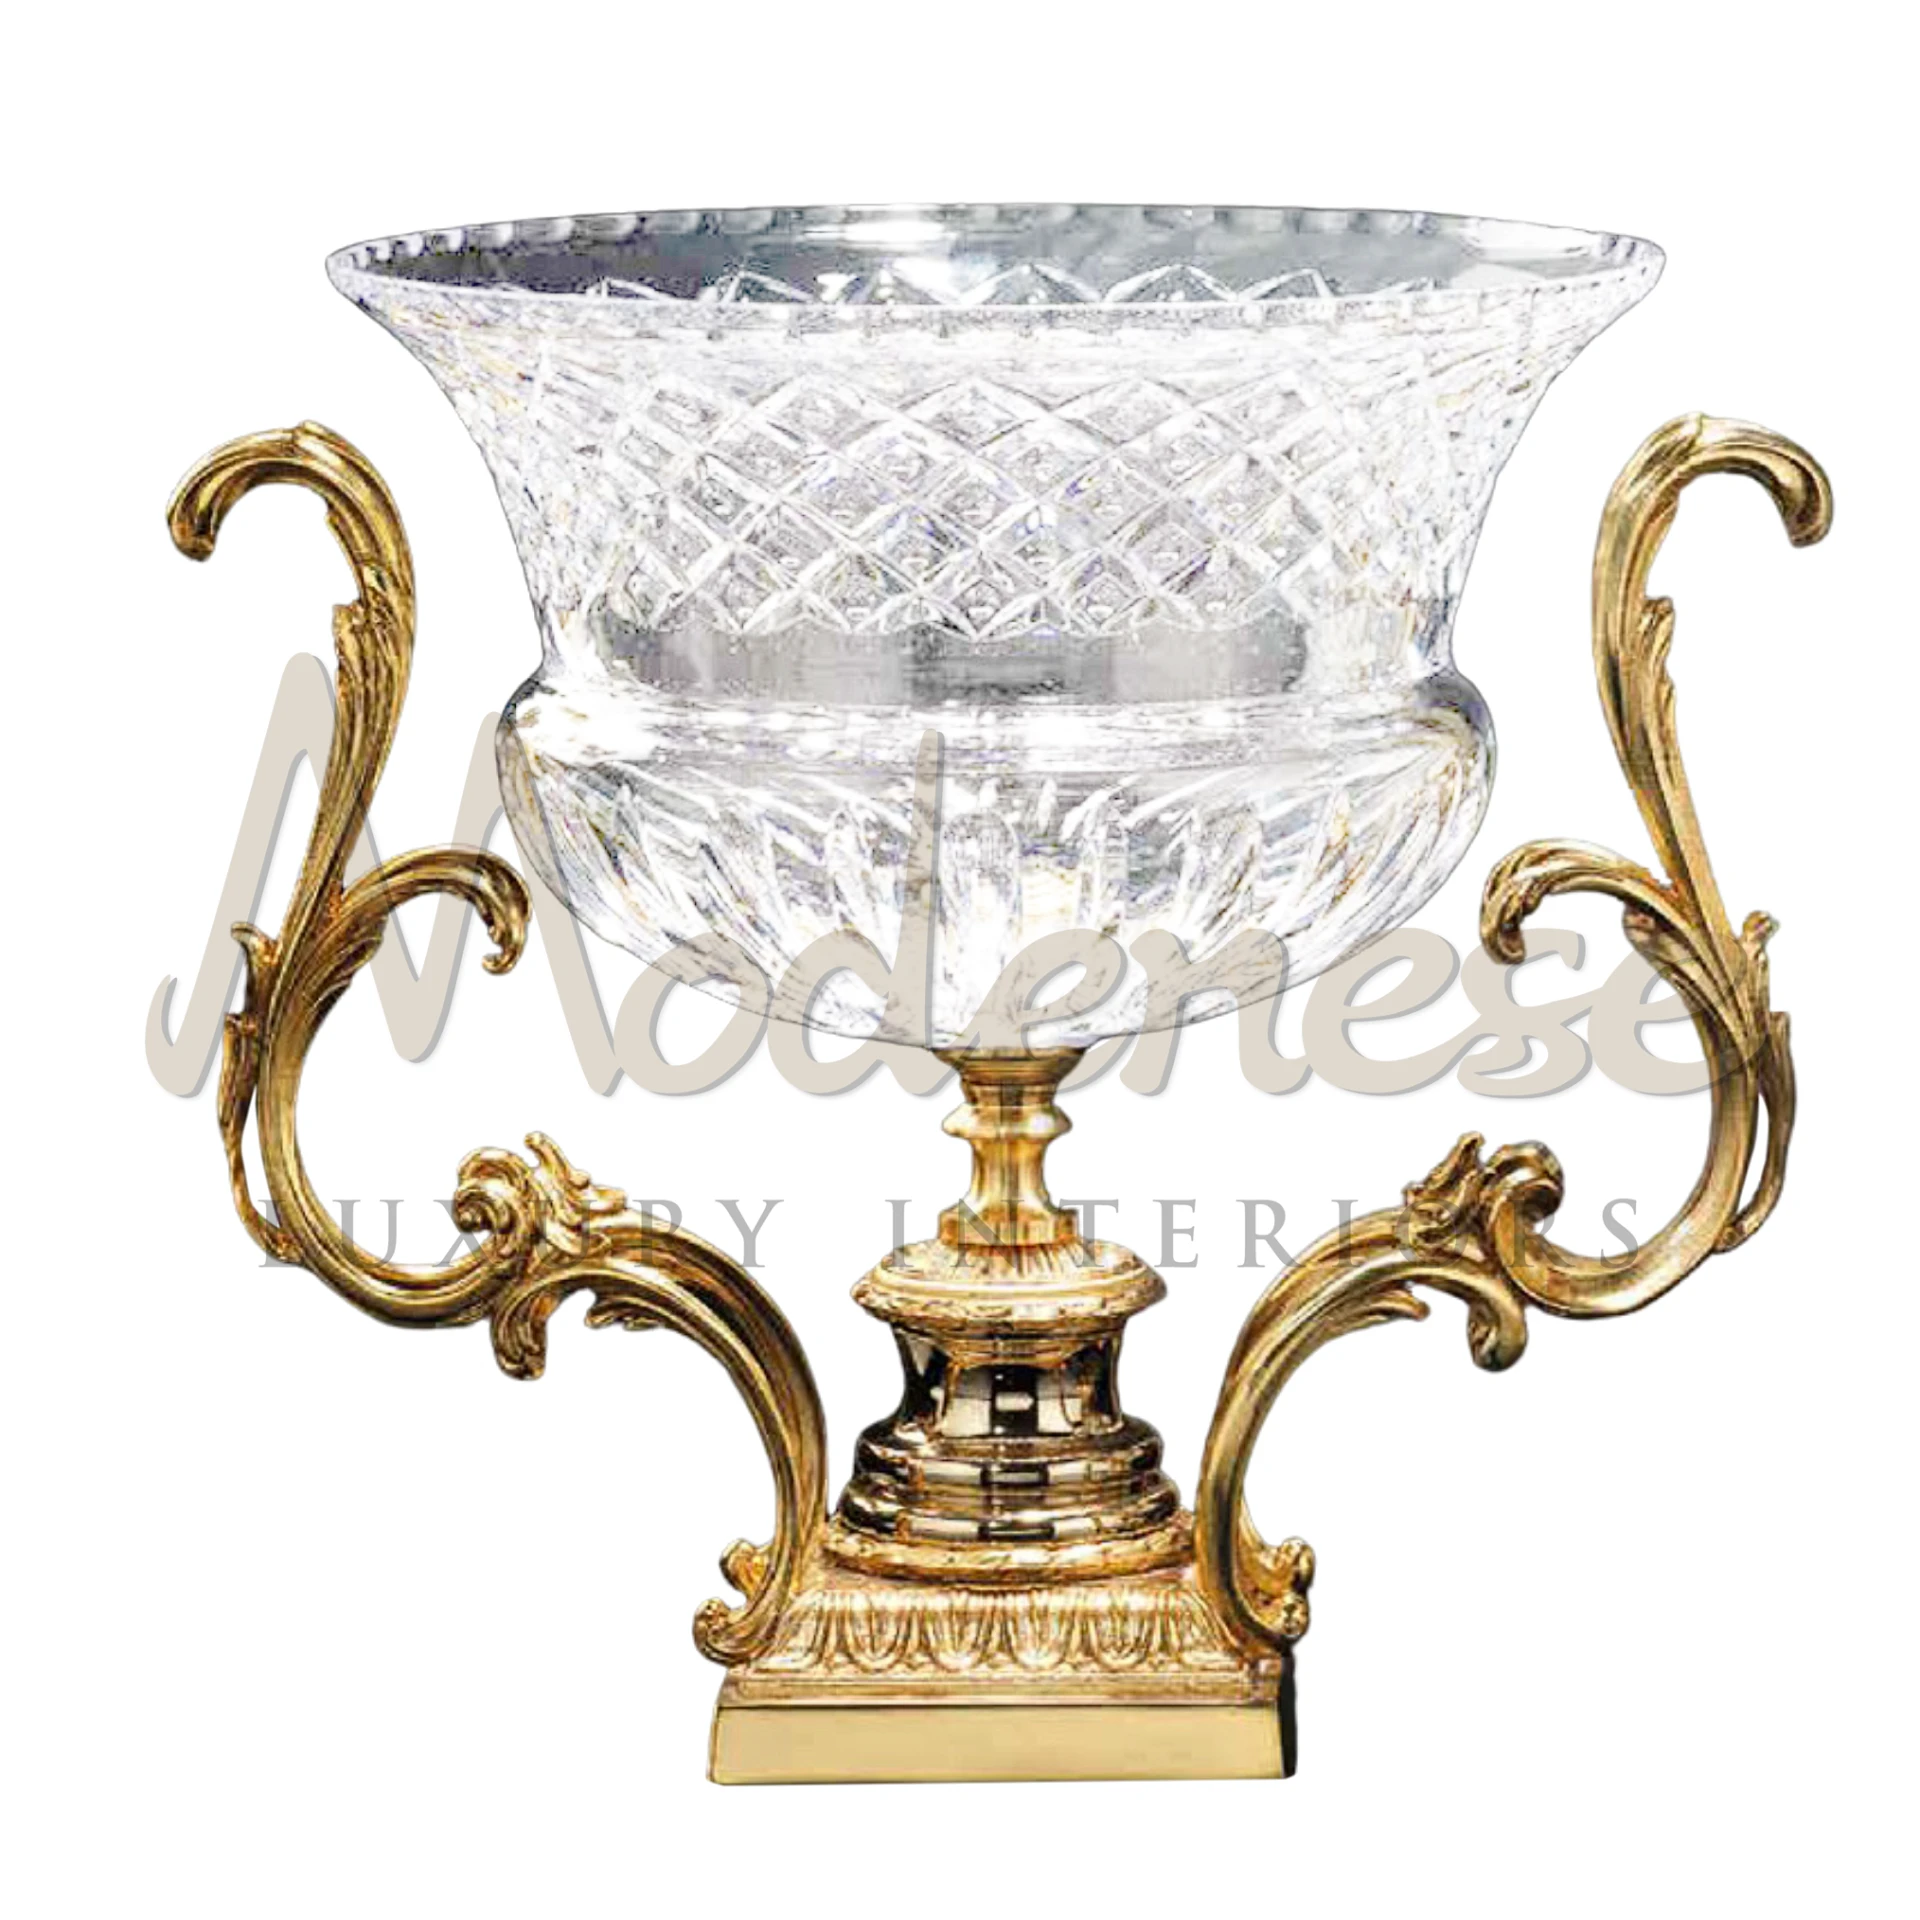 Gorgeous Gold Double Handled Bowl by Modenese, an elegant and luxurious home decor item that signifies quality and timeless beauty.